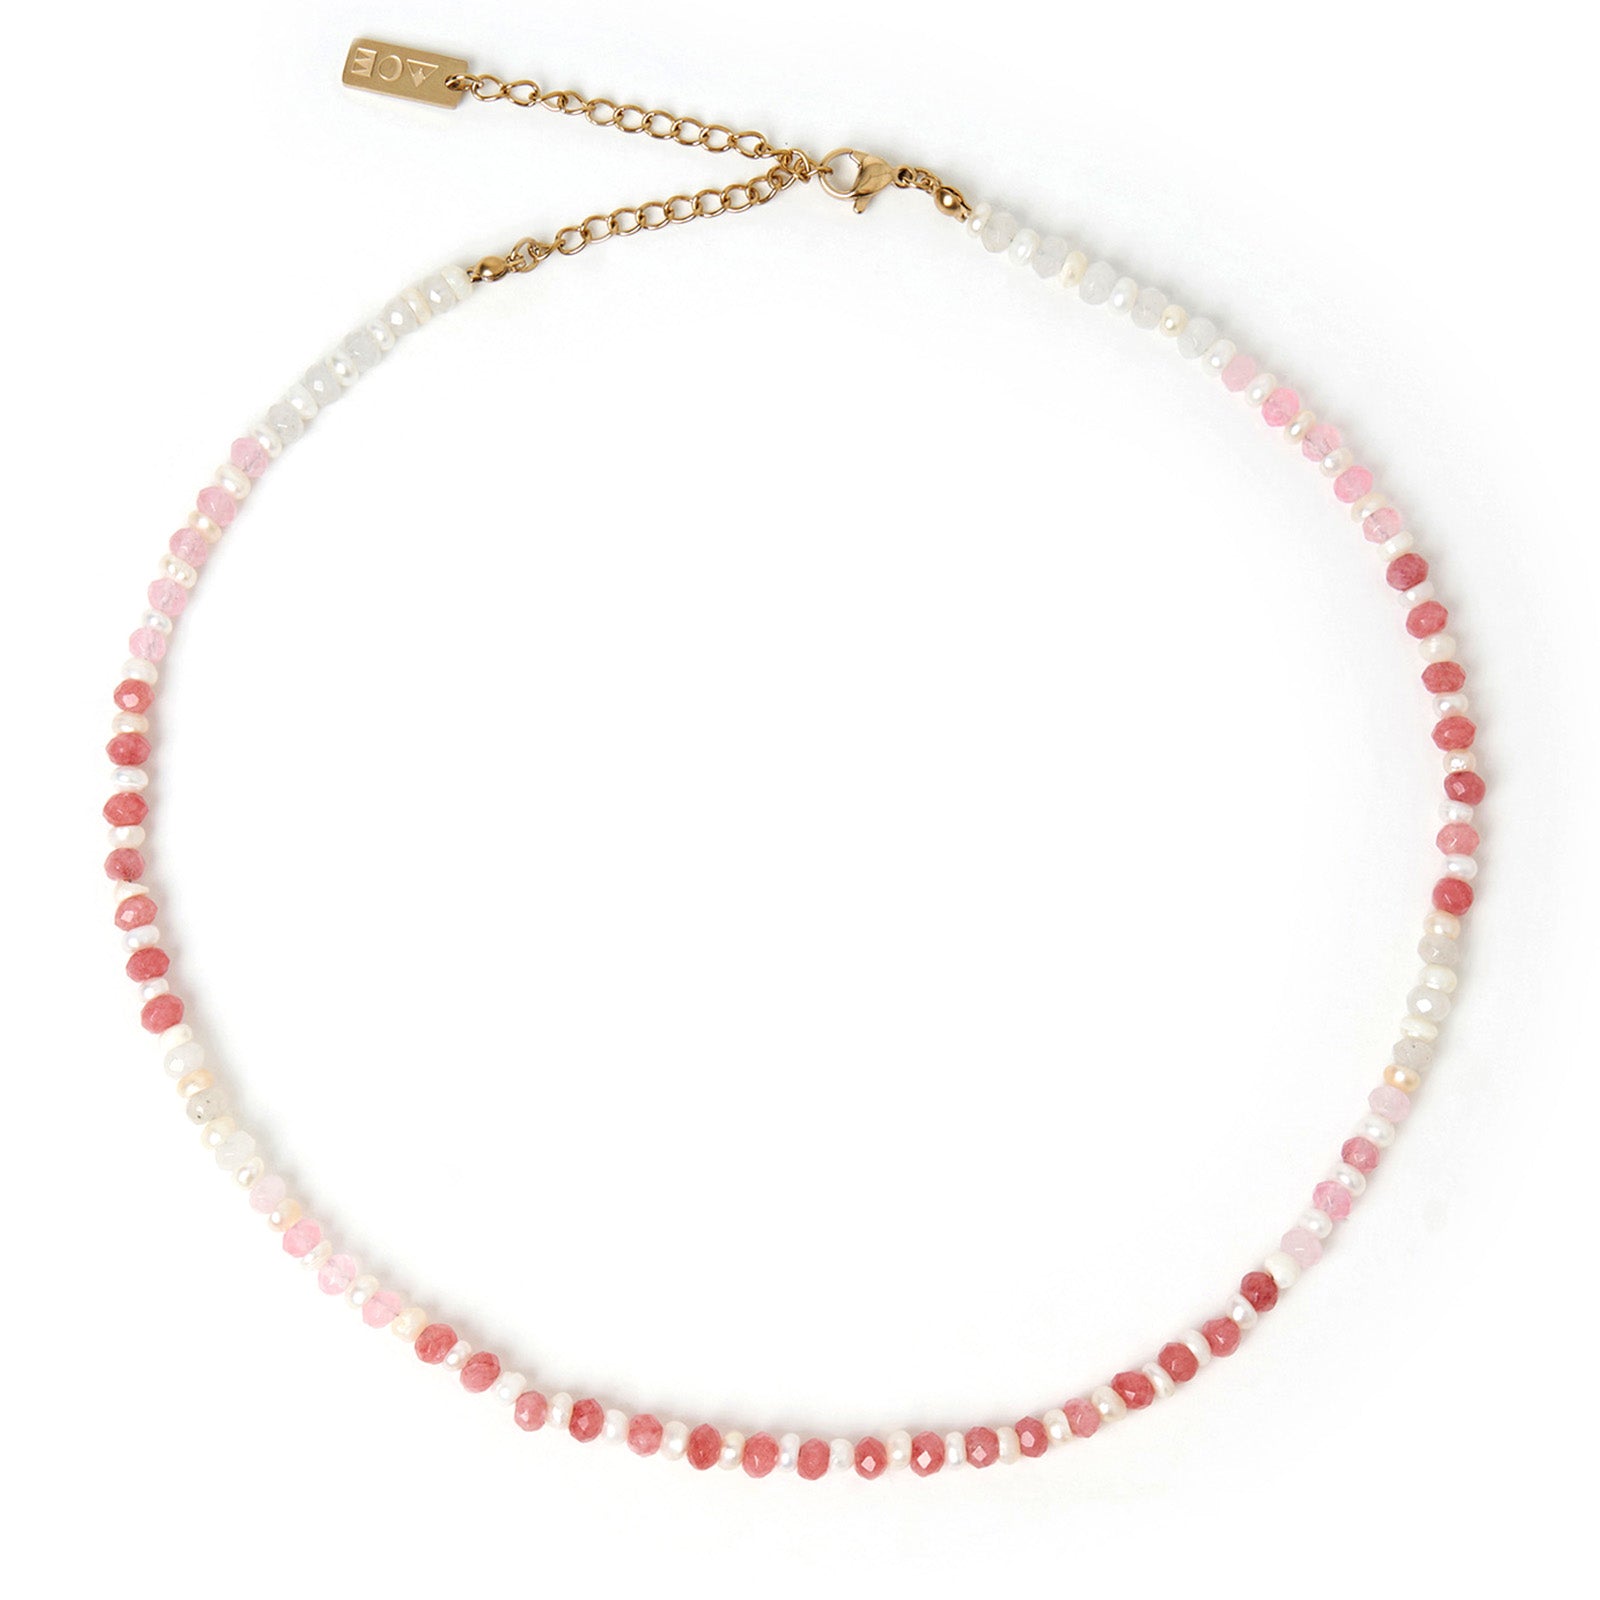 Bloom Pearl and Gemstone Necklace - Watermelon